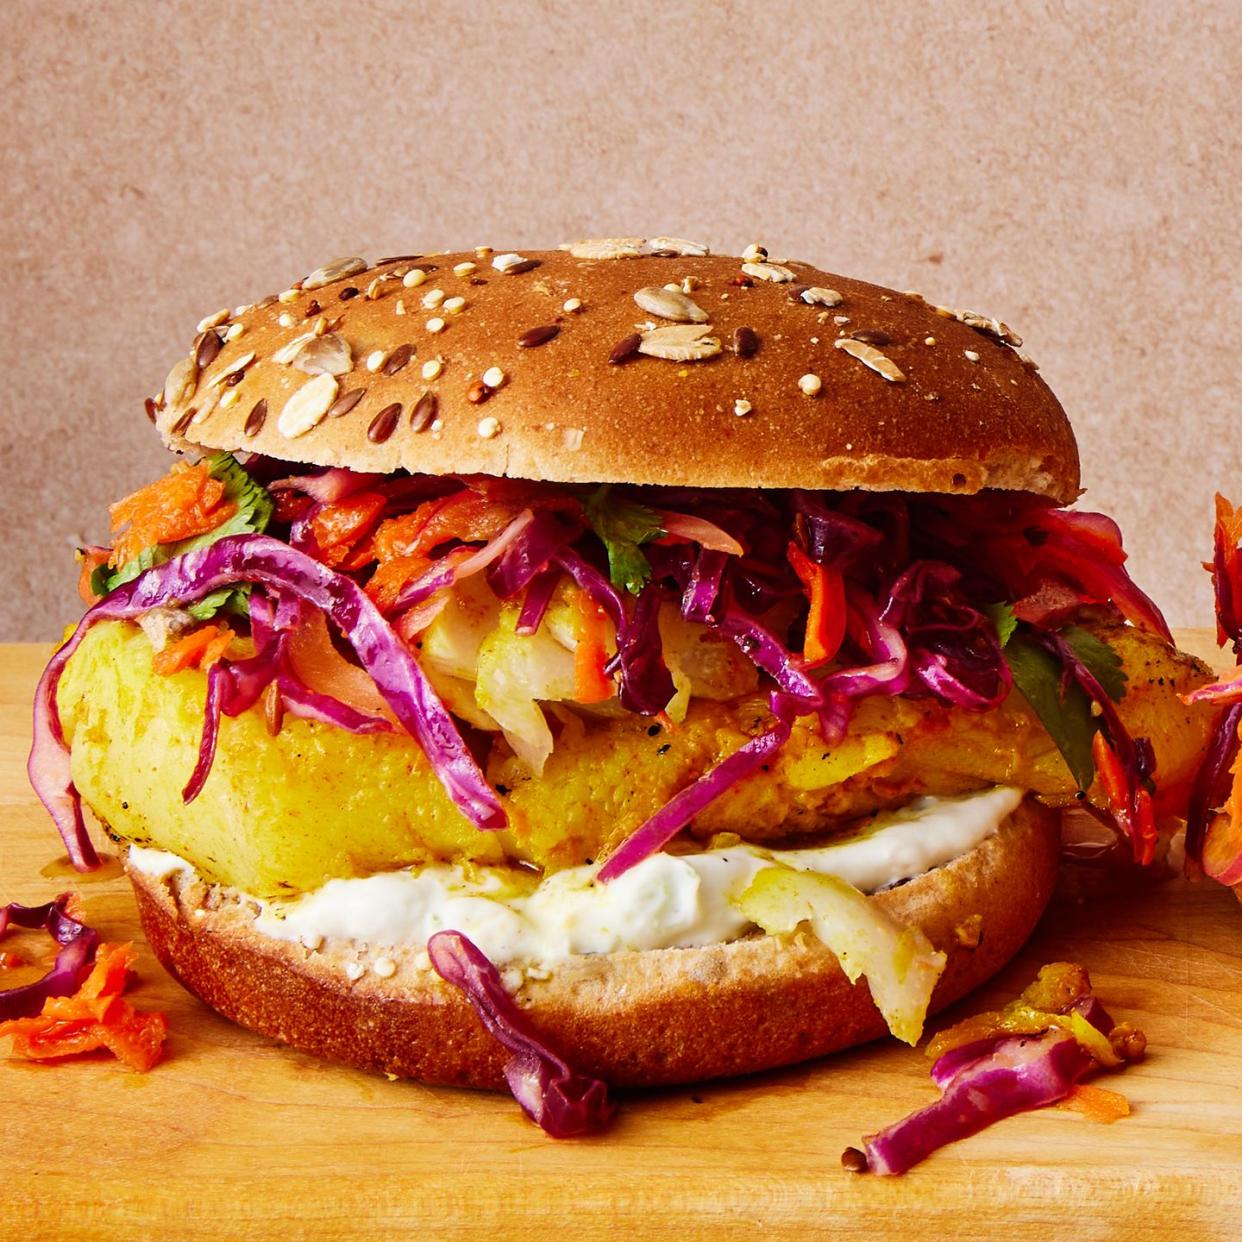 grilled fish sandwich with slaw and tzatziki on a multigrain bun